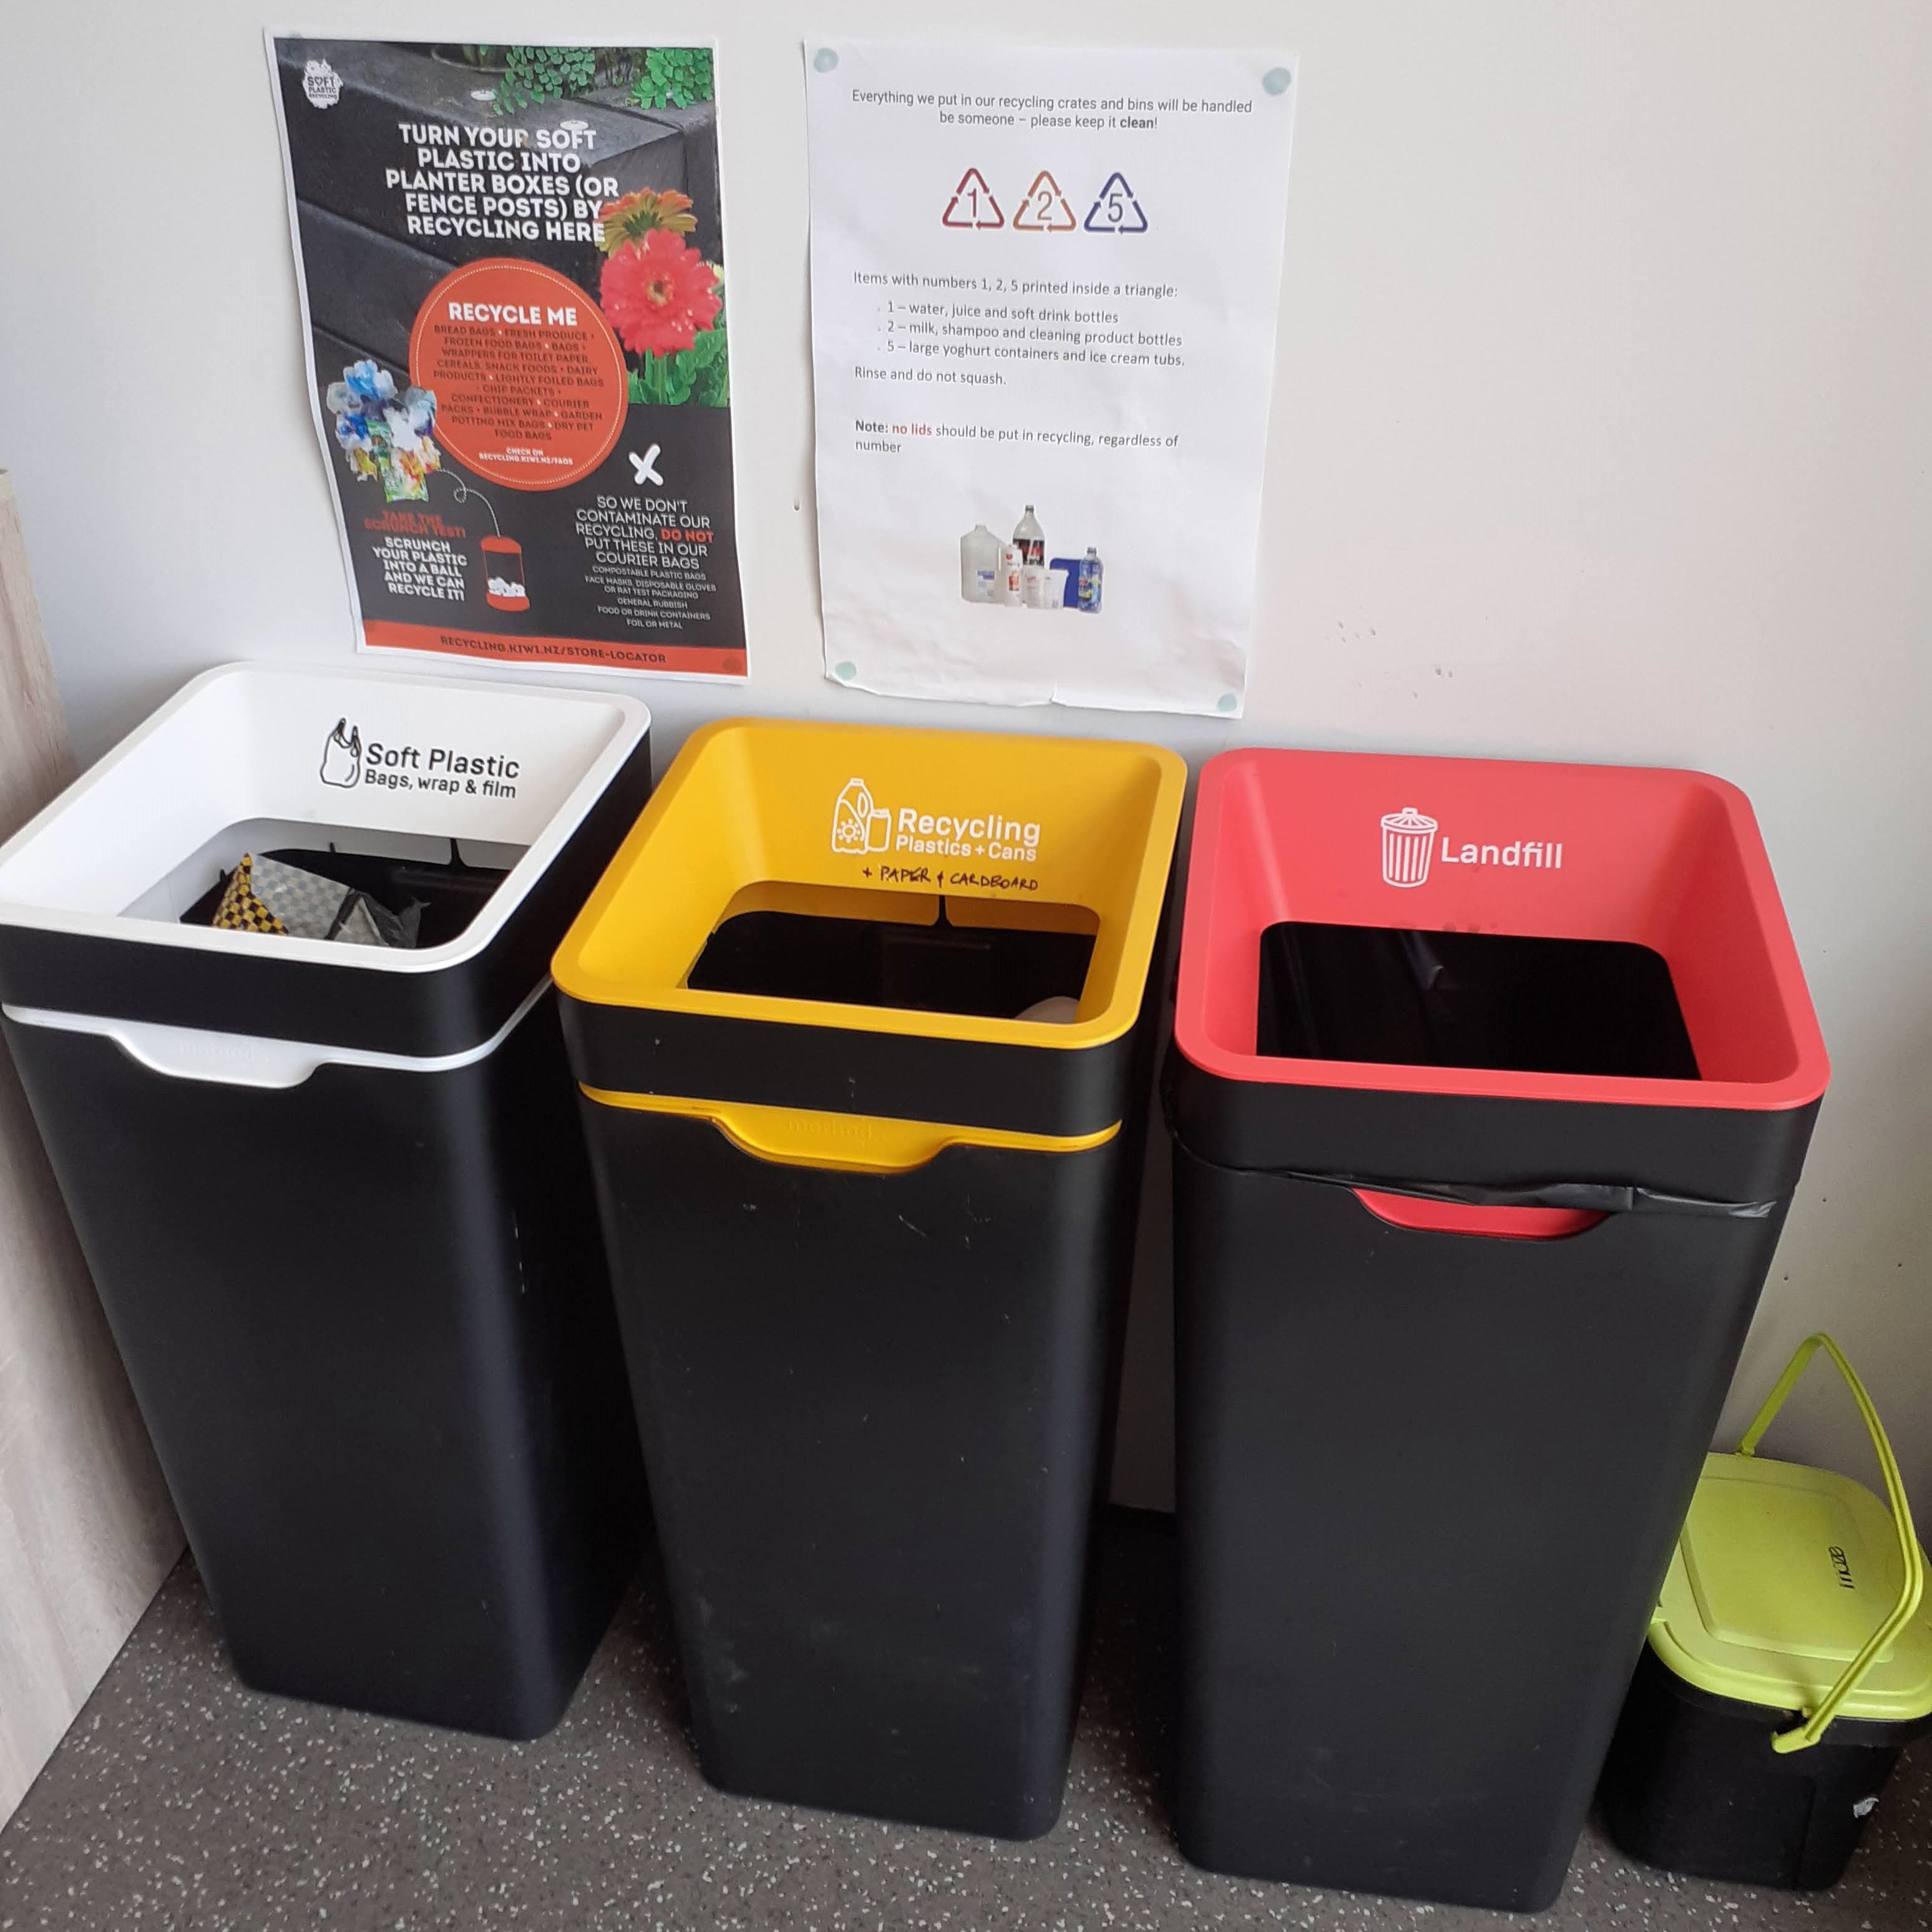 Recycling bins at Cuttriss offices